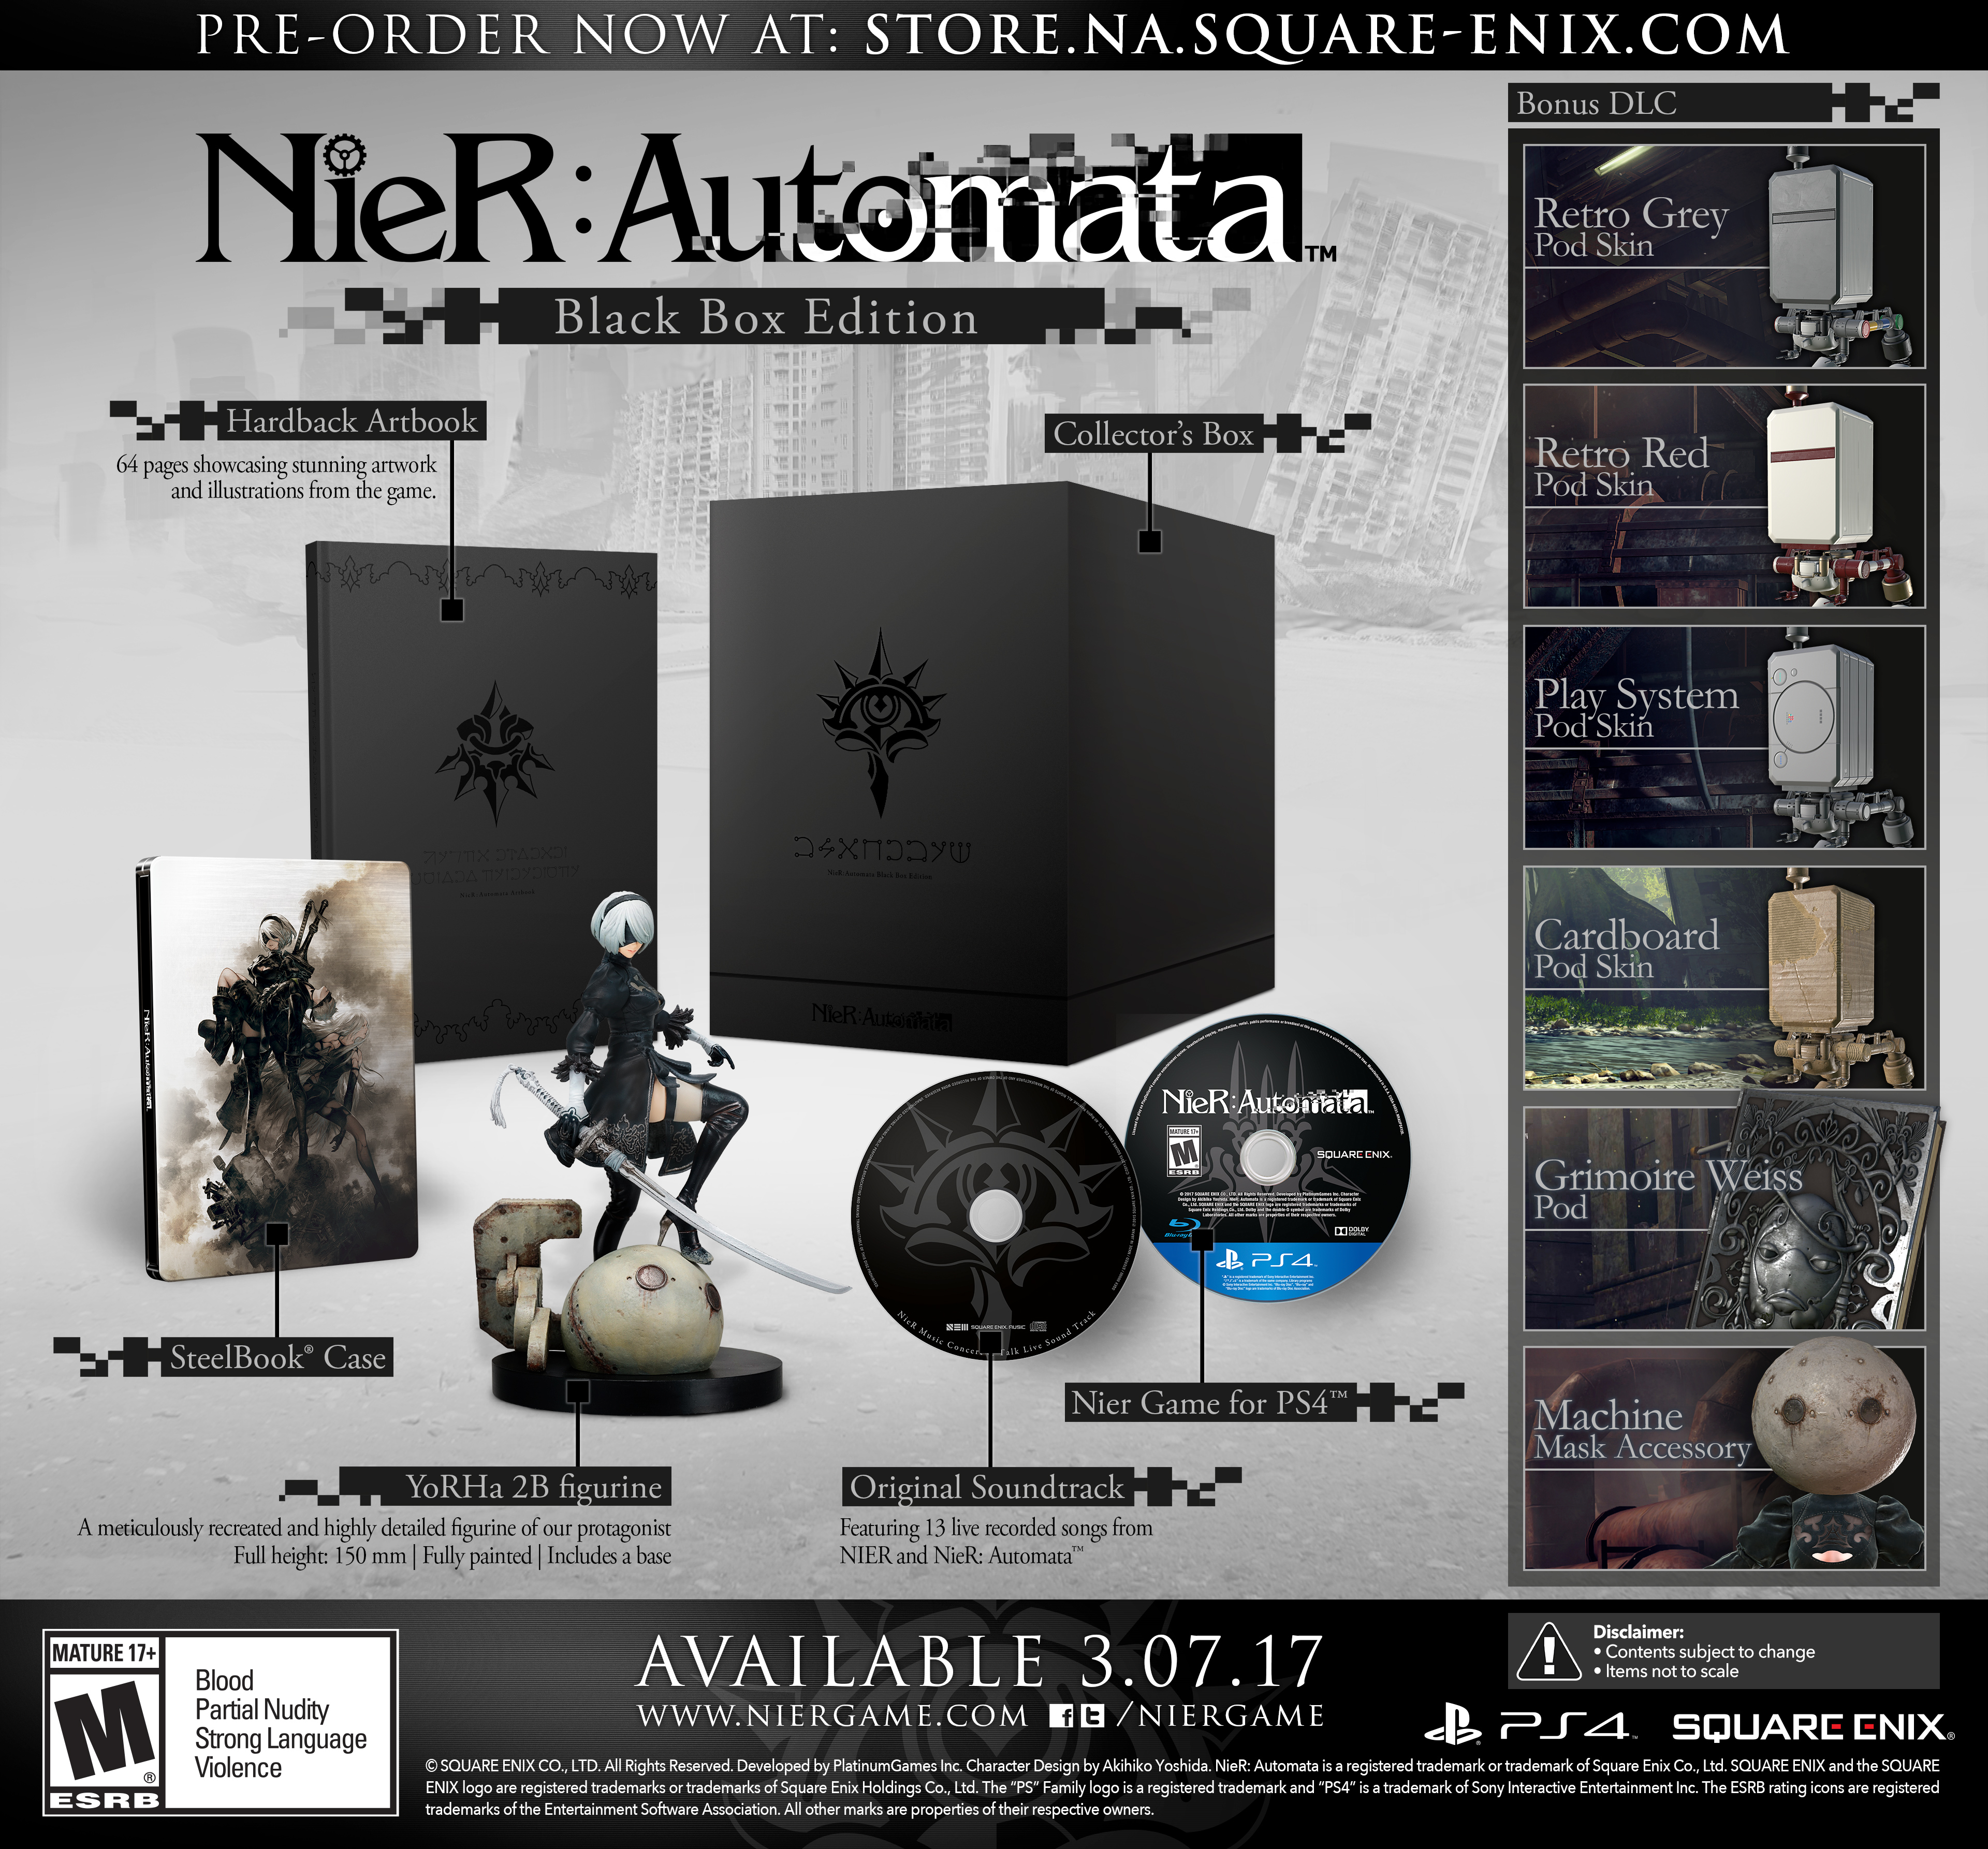 NieR: Automata for PS4 launches March 7 in North America, March 10